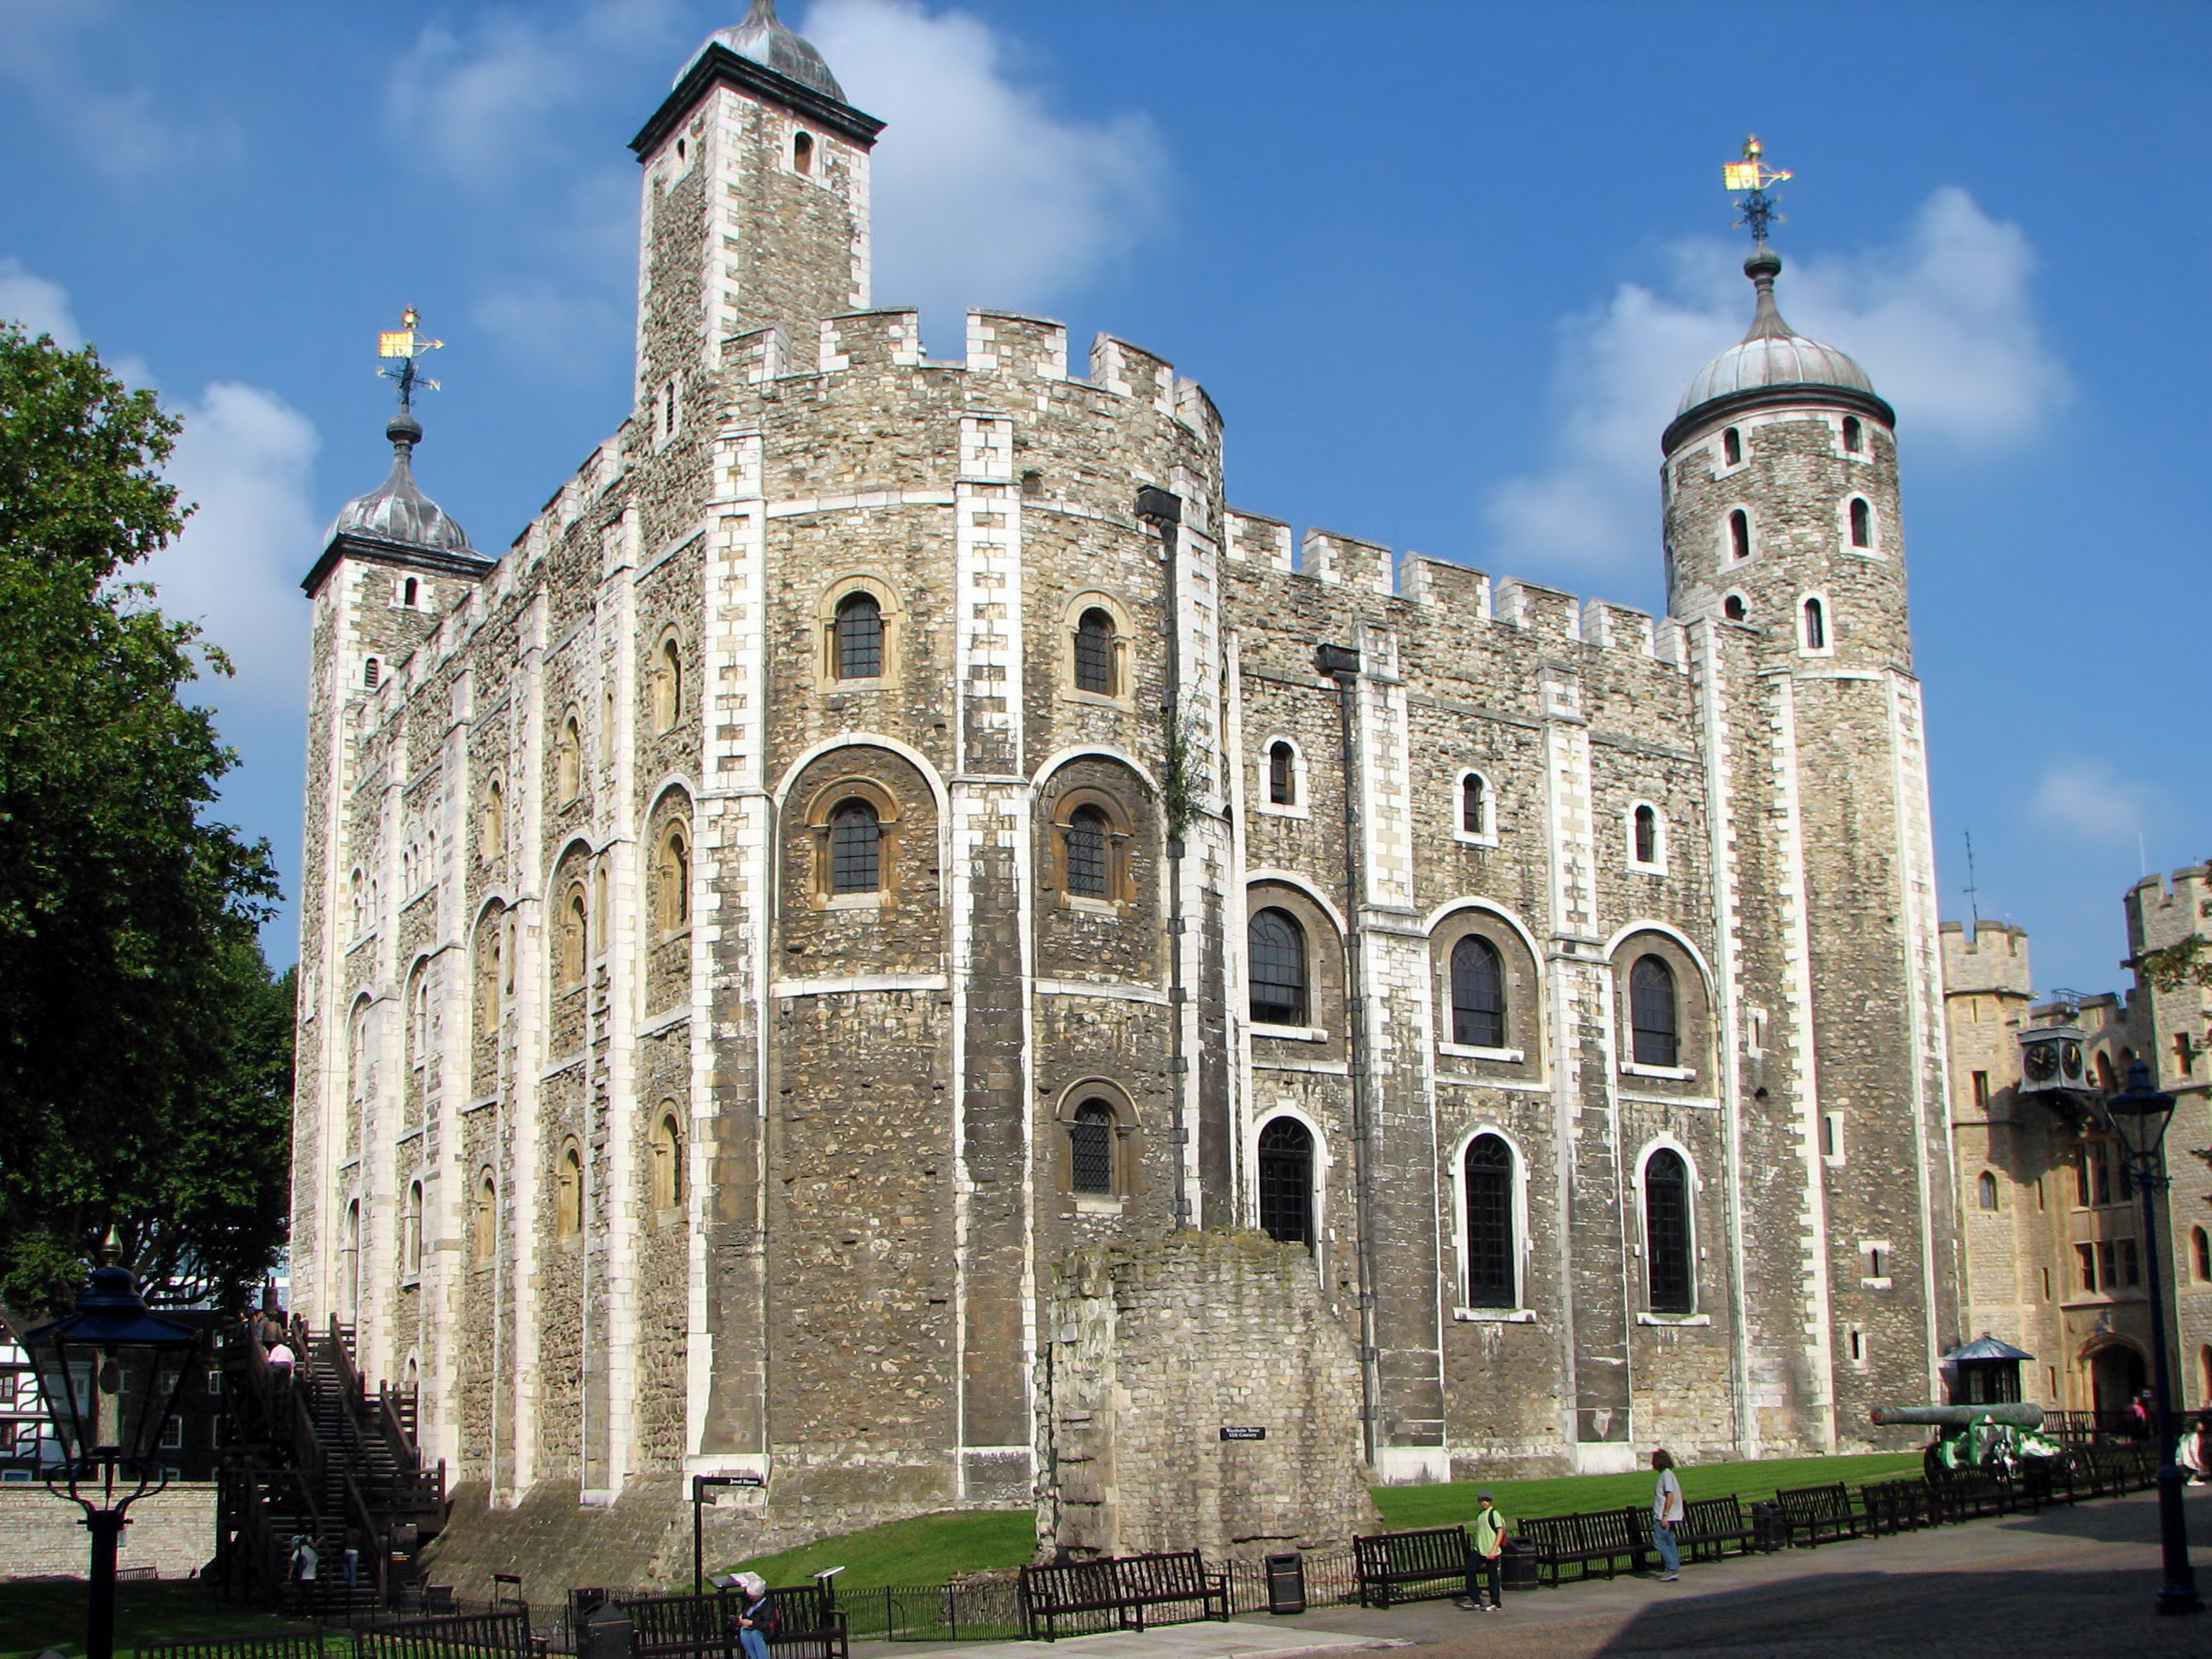 File:Tower of London White Tower.jpg - Wikimedia Commons